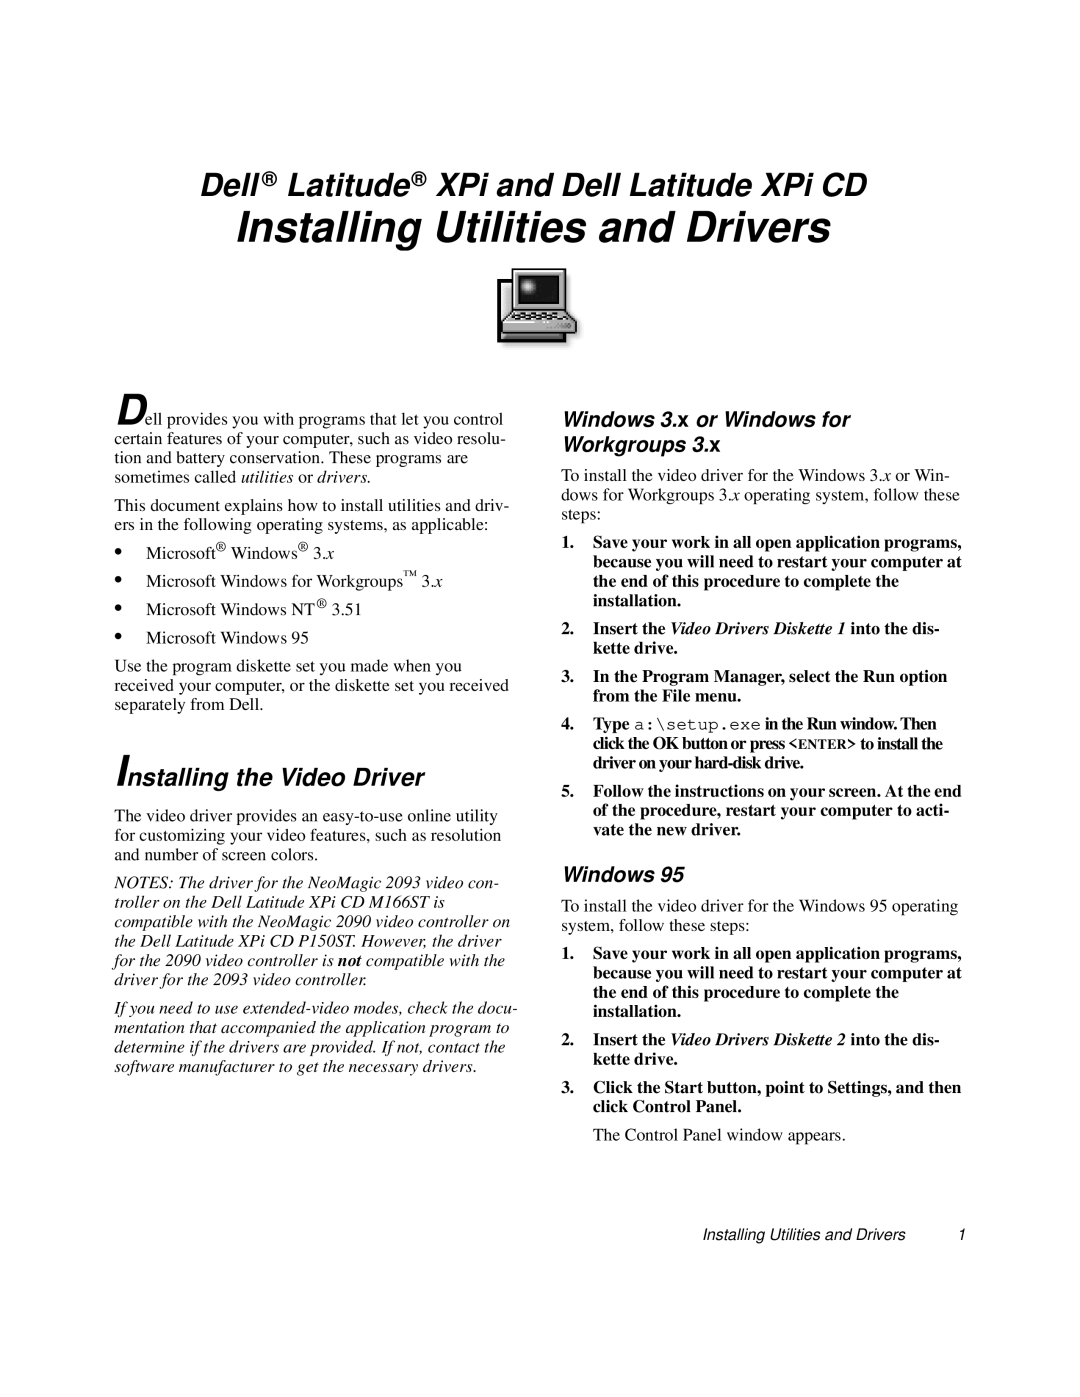 Dell XPi/XPi CD manual Installing the Video Driver, Windows 3.x or Windows for Workgroups 